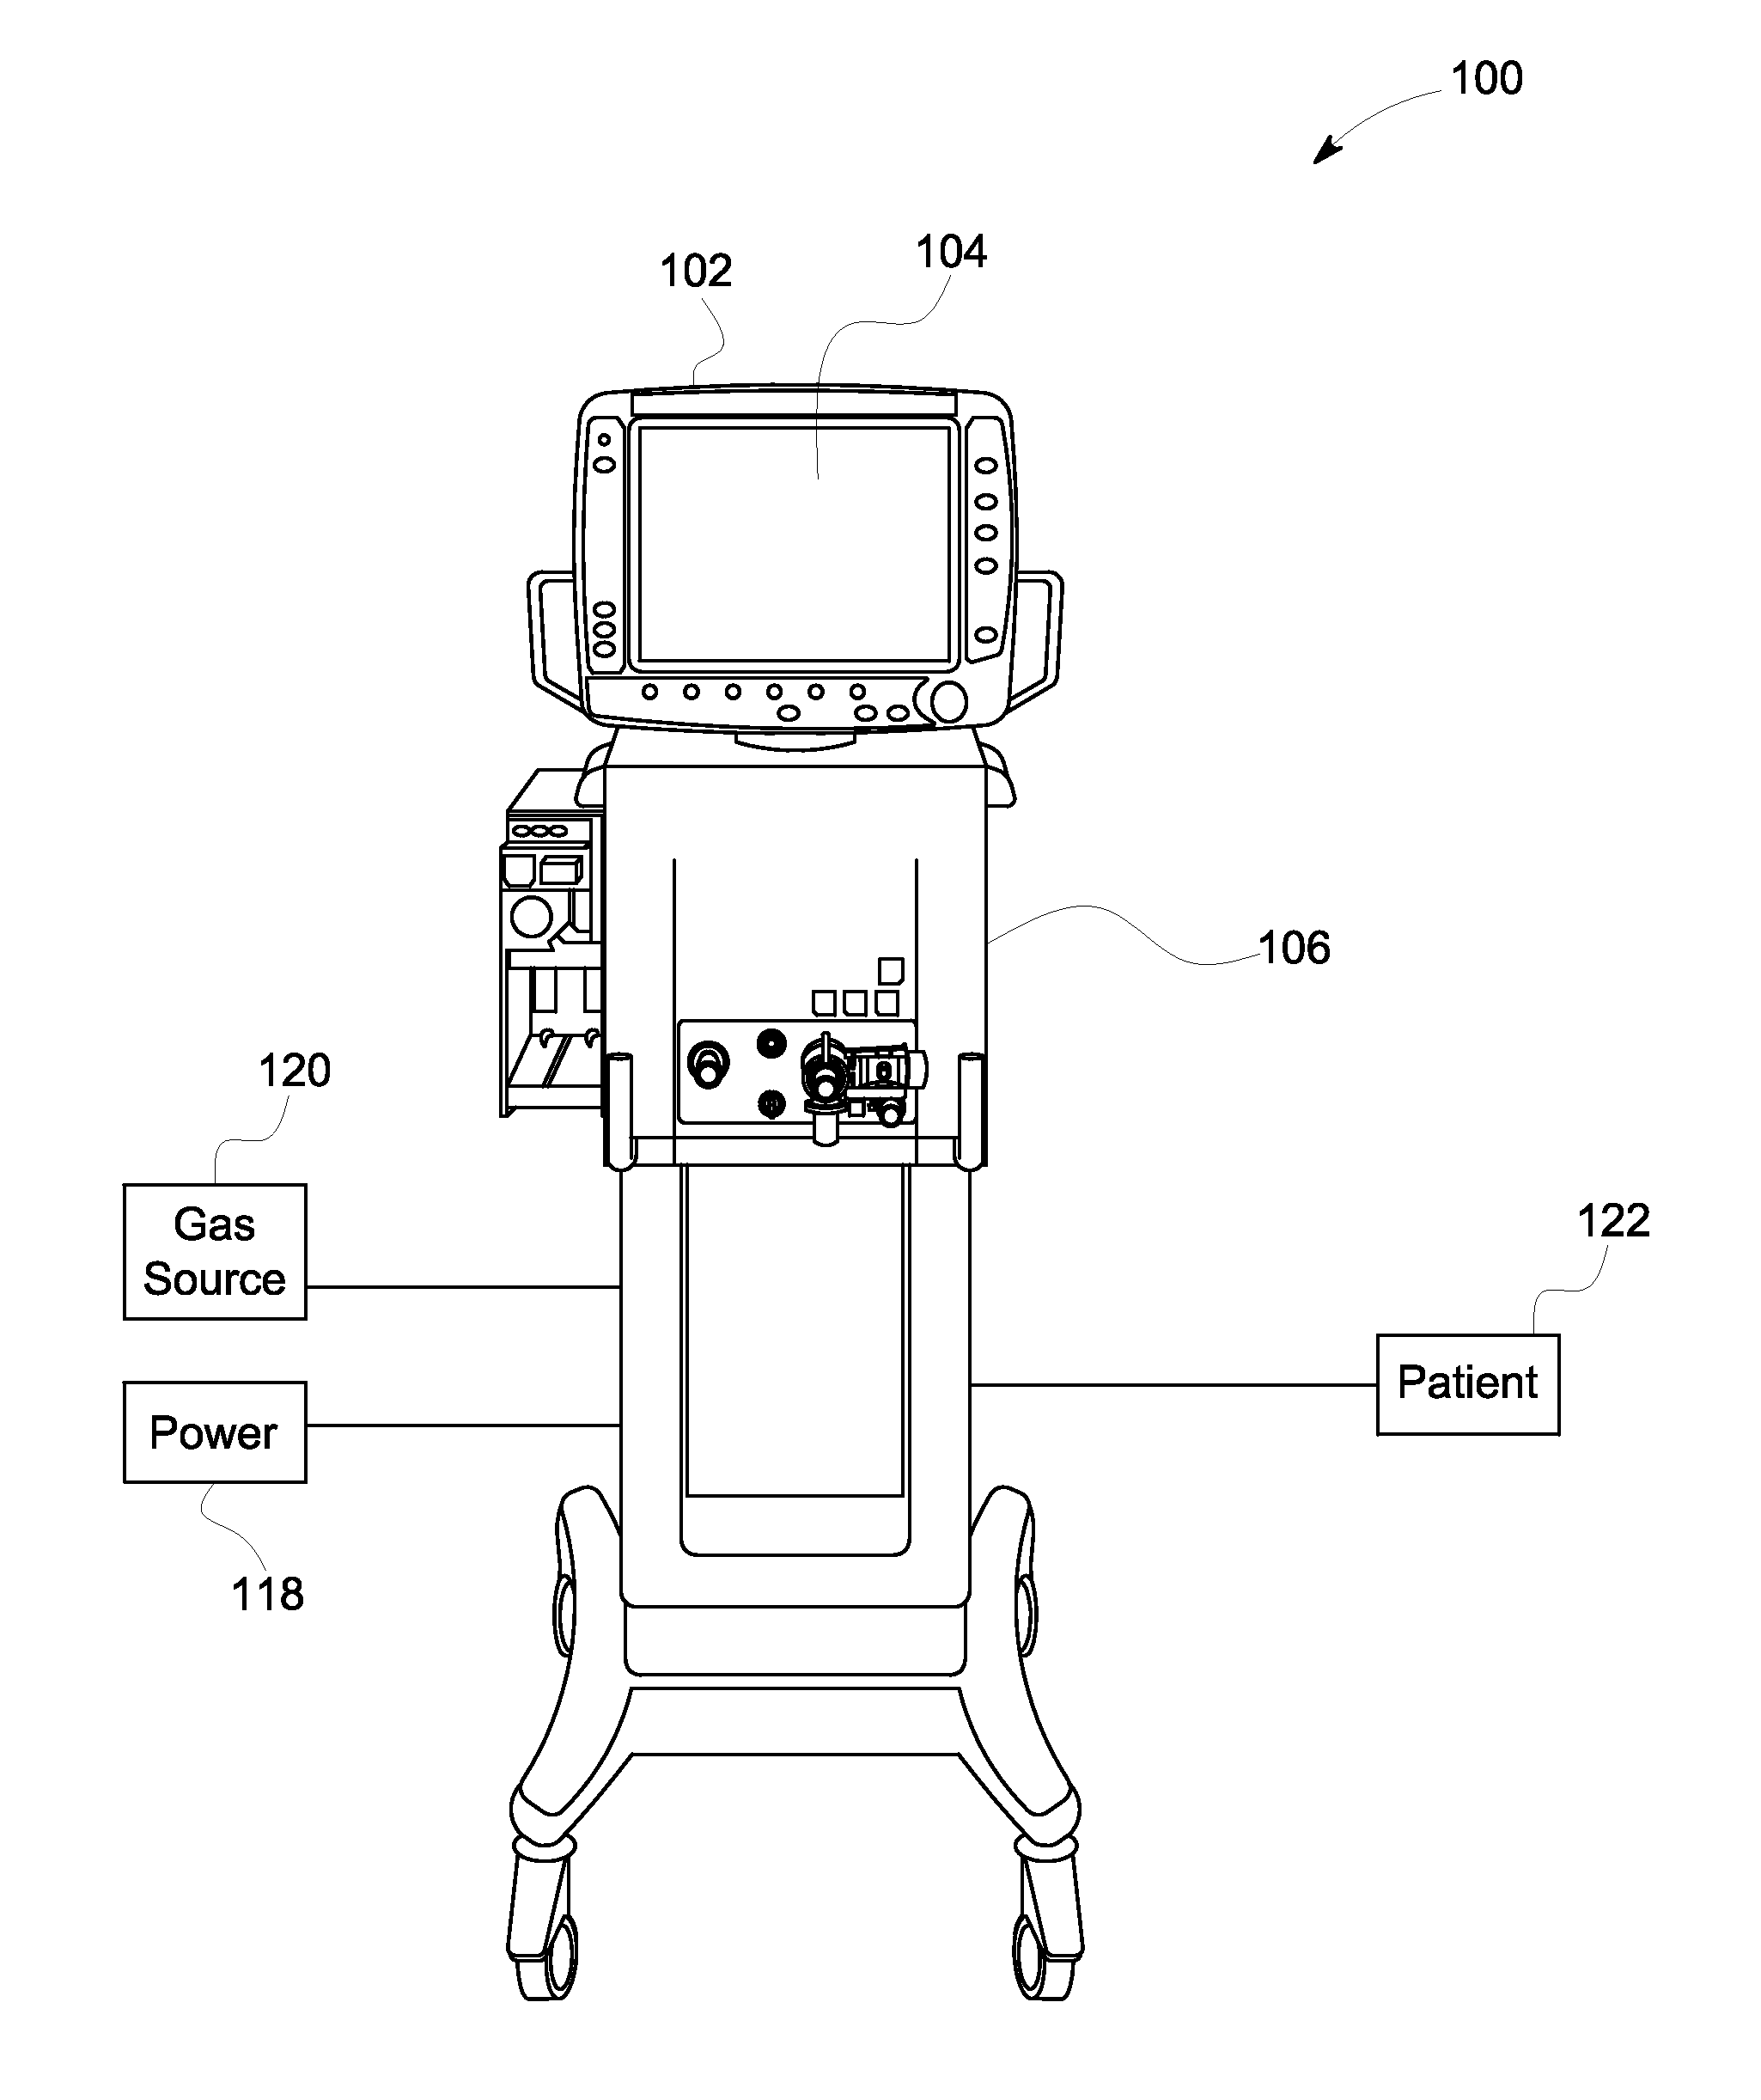 Method and system for controlling medical monitoring equipment